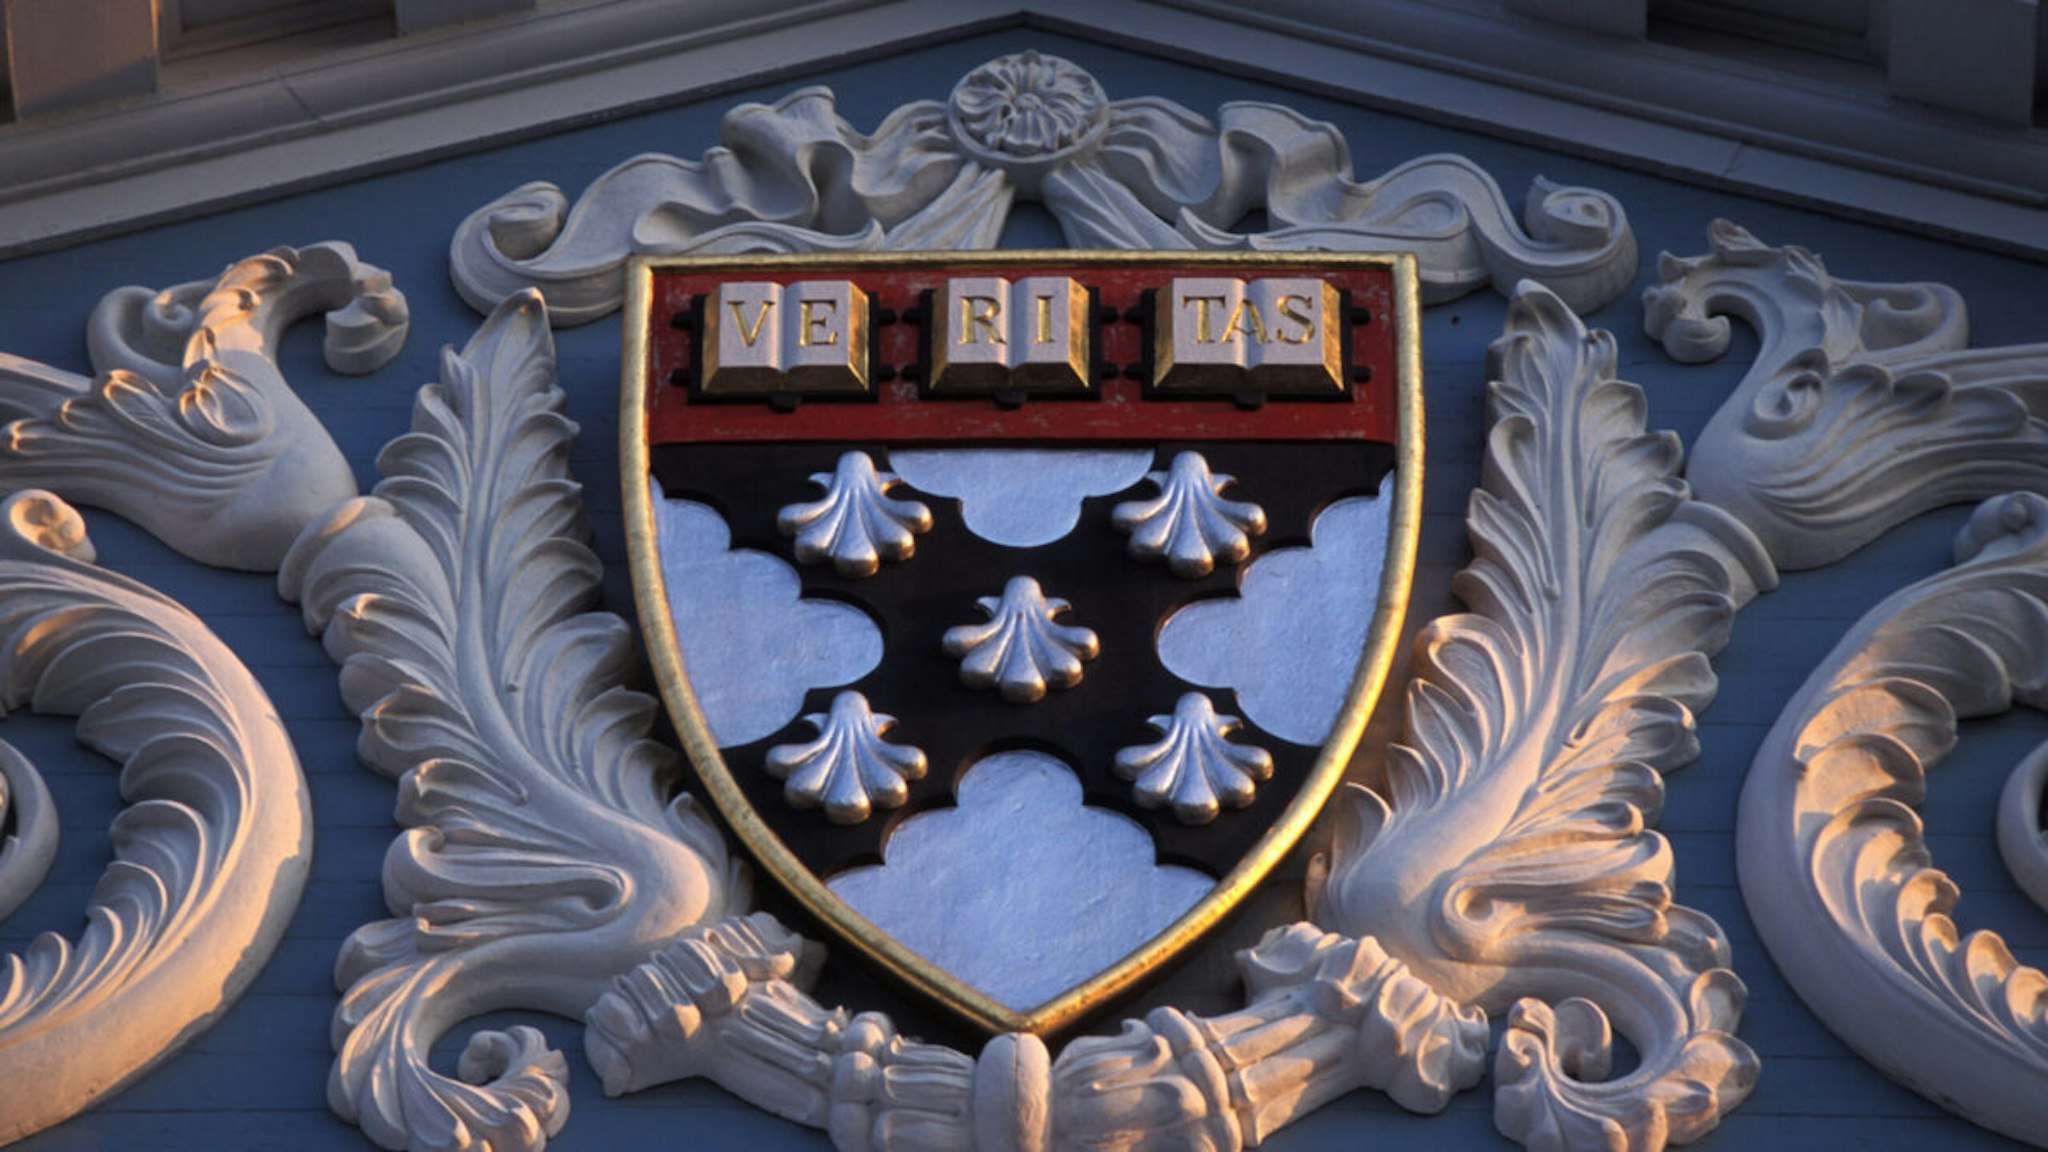 The Harvard seal detail on a pediment atop the Harvard Business School, located in Boston, one of the graduate schools of Harvard University, and one of the world's leading management schools. Founded in 1908, it offers a full-time MBA program, a Doctoral program and several executive education programs.